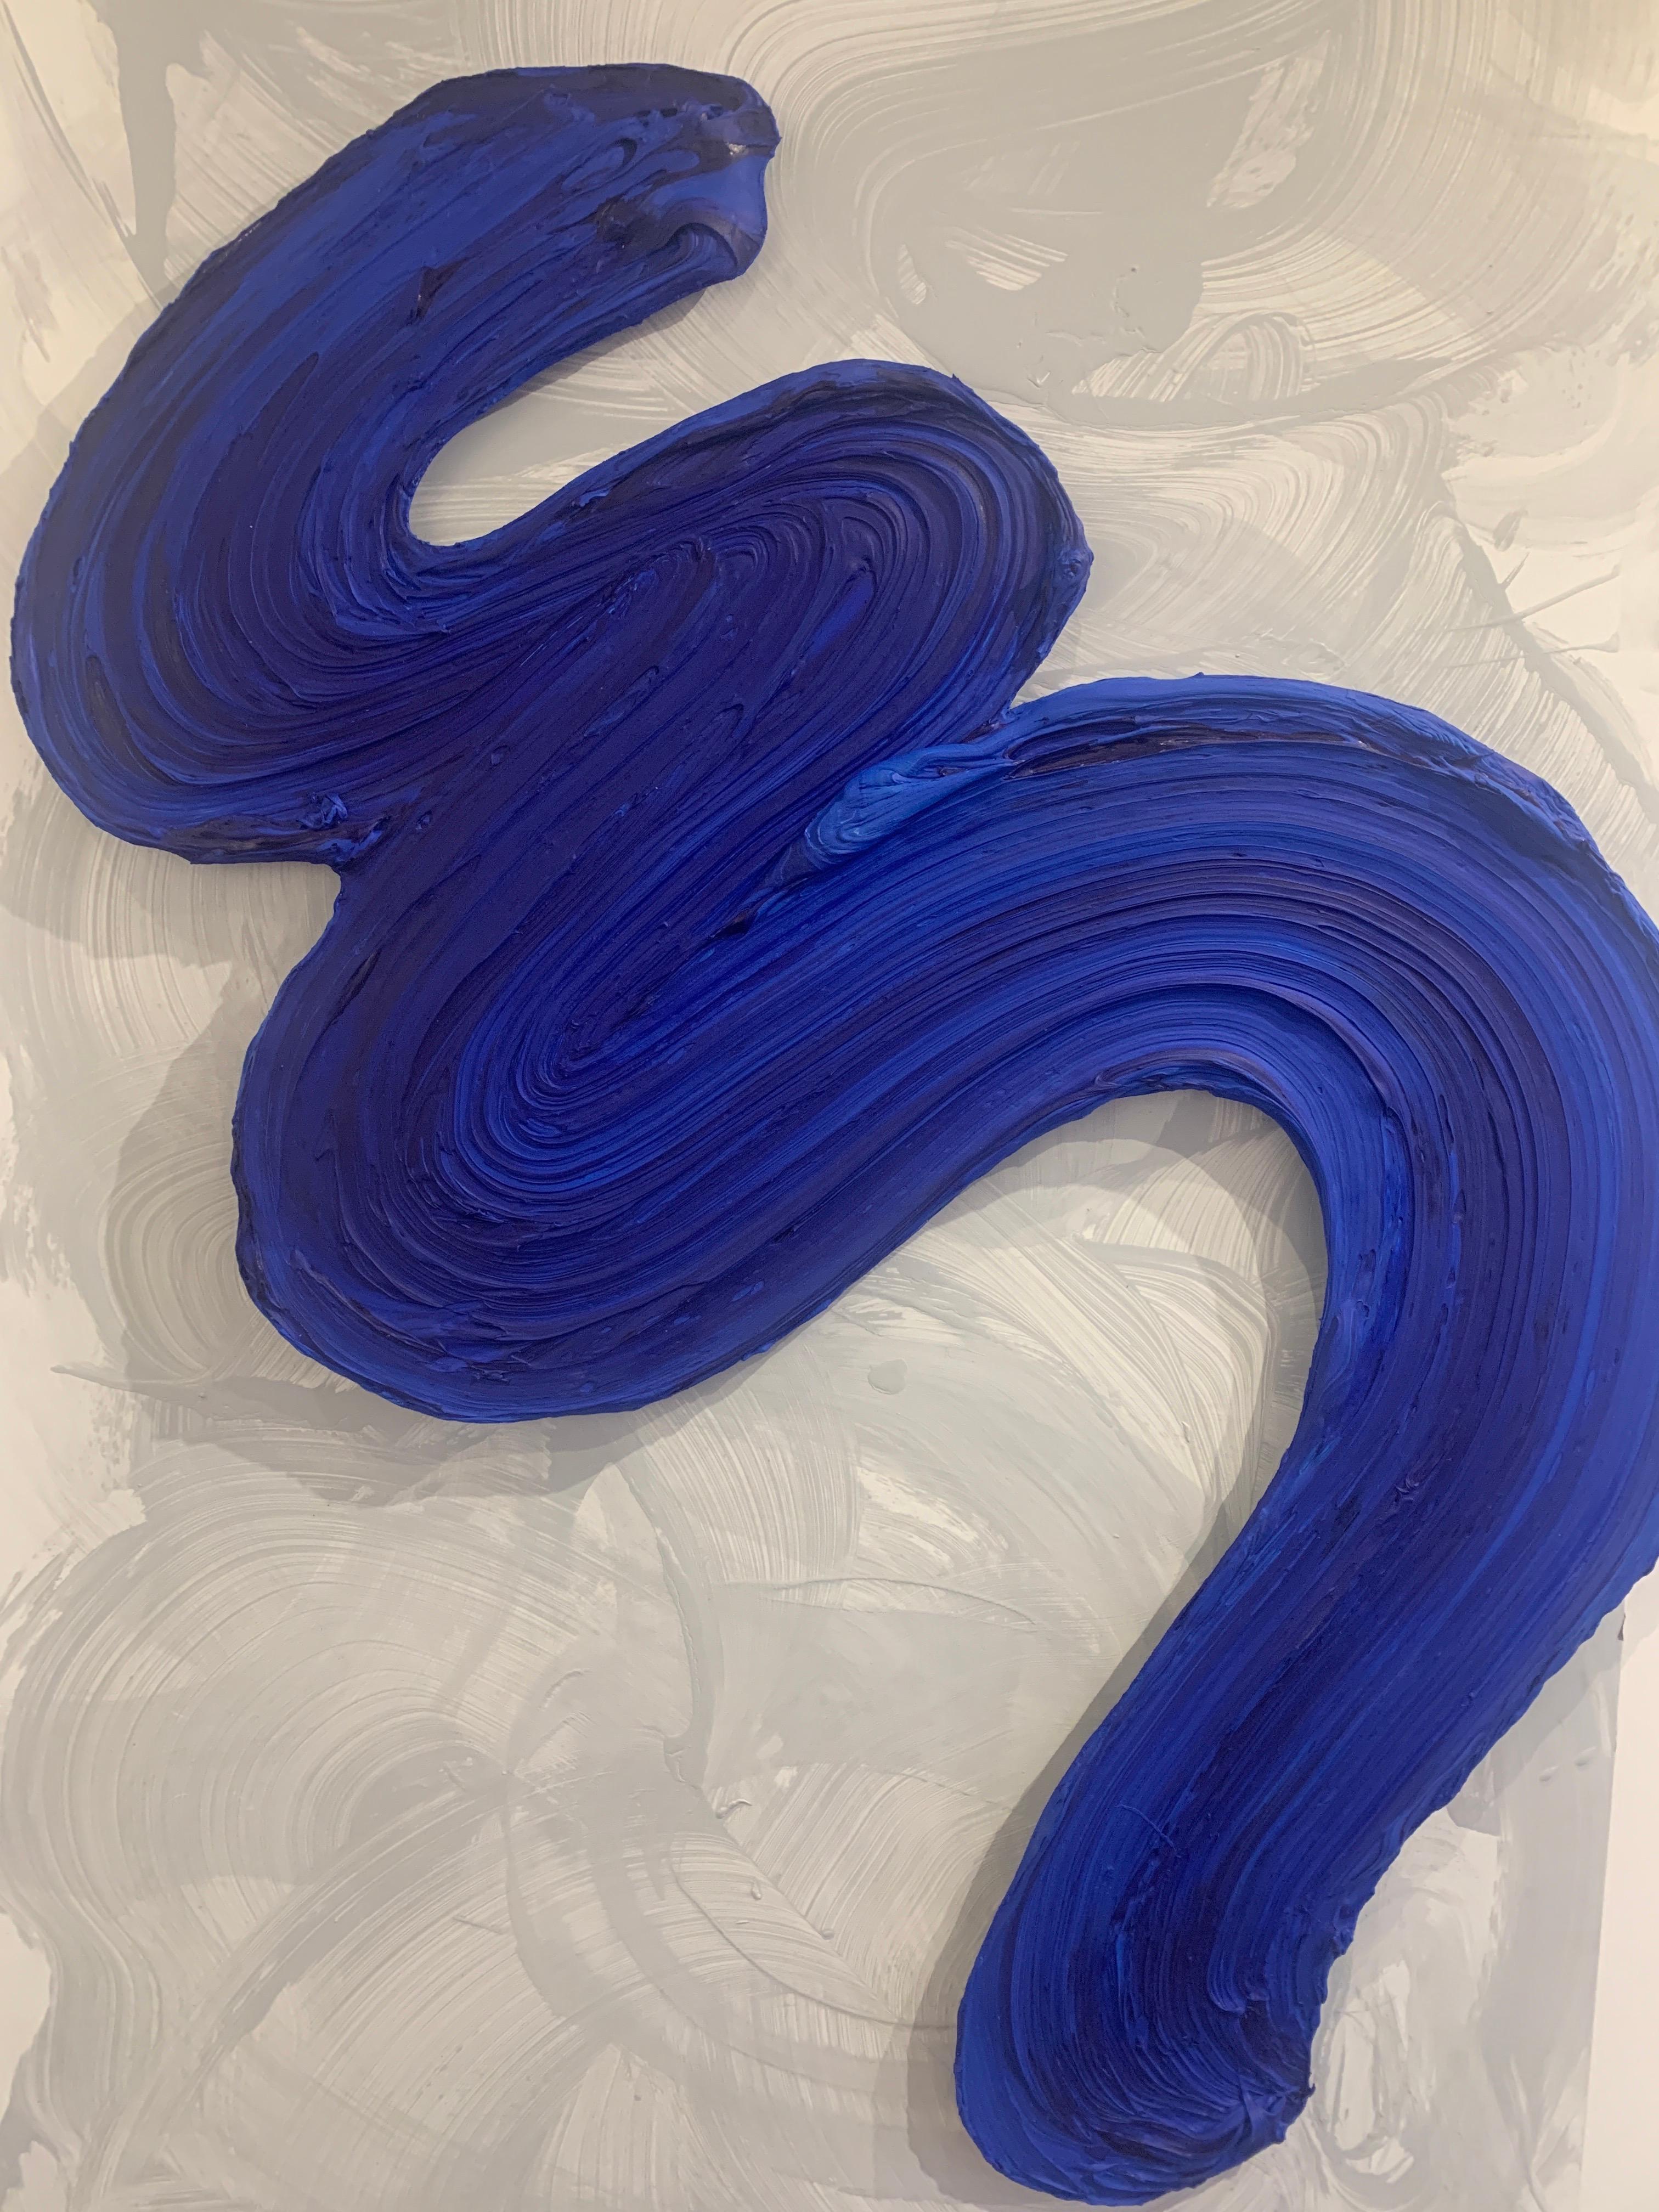 Pame - Sculpture by Donald Martiny